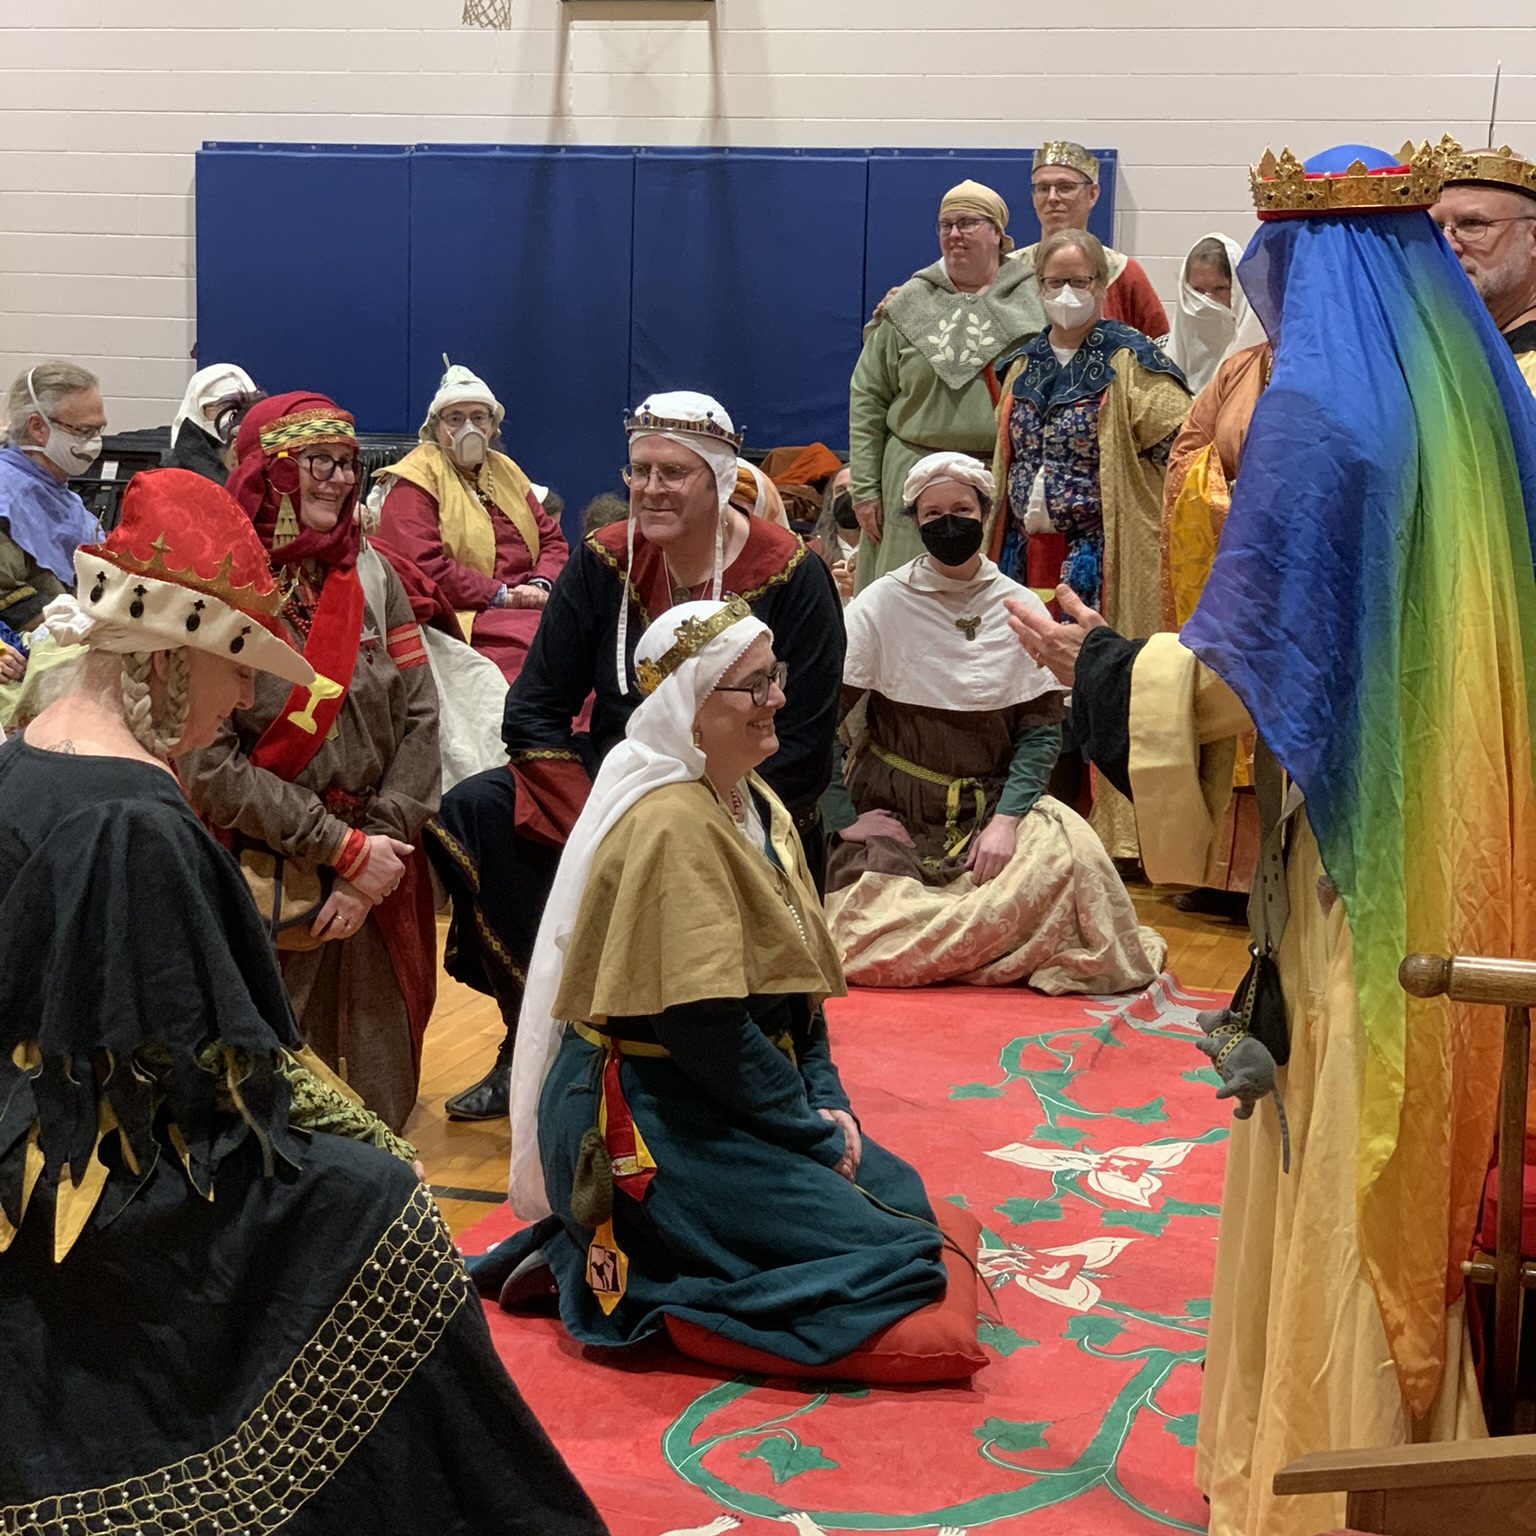 Baroness Sciath kneels before Queen Kaylah, surrounded by the order of the Pelican